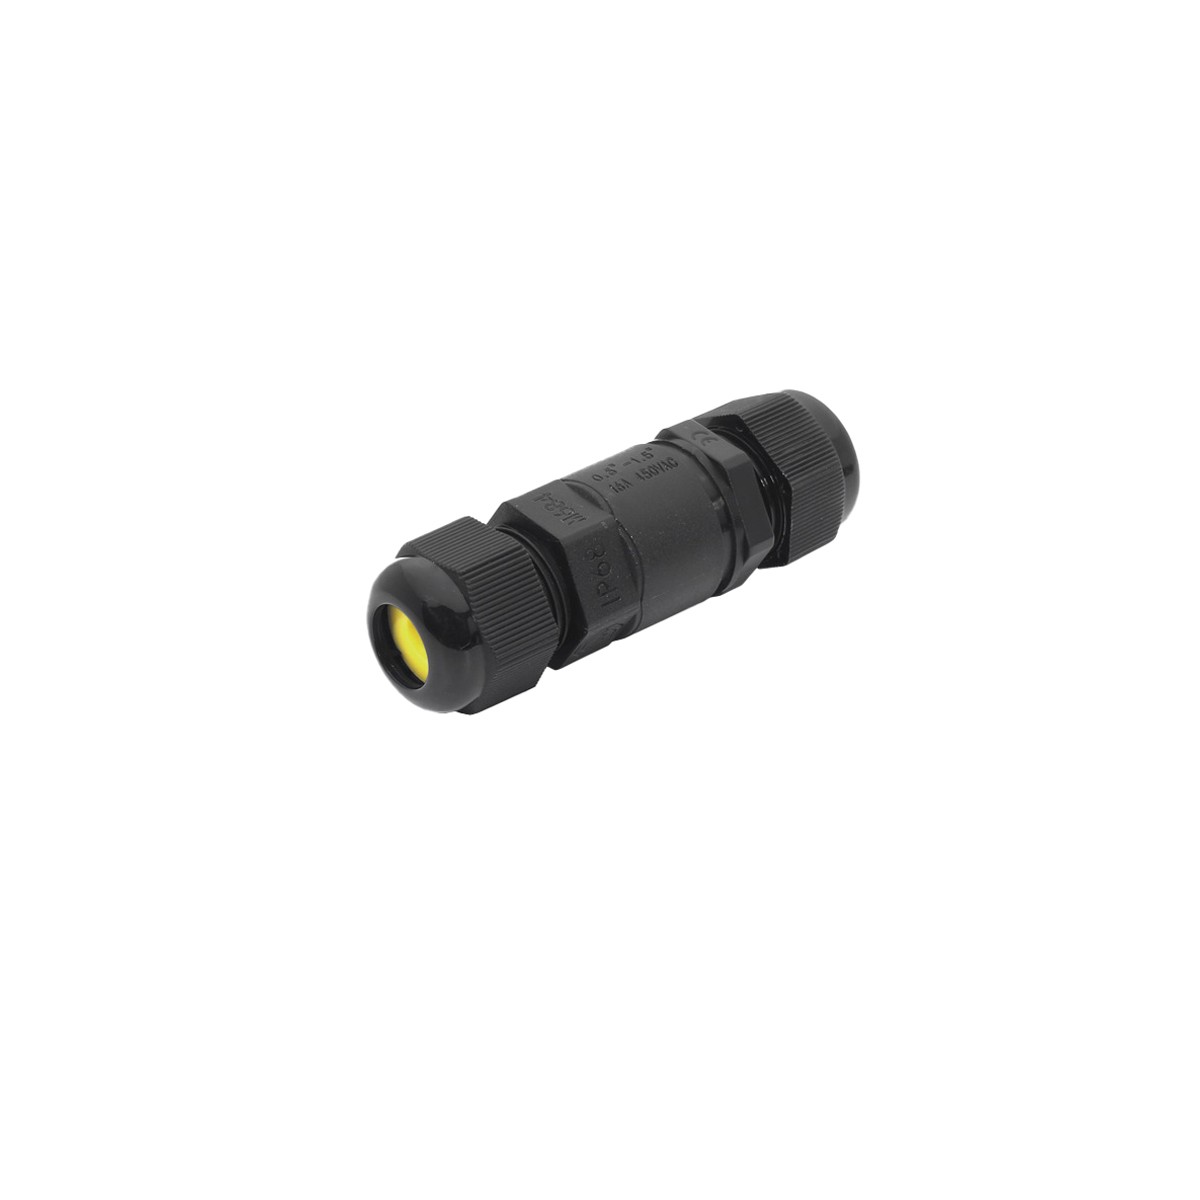 IP68 Waterproof Cable Connector 0.5 mm² - 2mm² 0.5 mm² - 2mm² Waterproof Cable Connector